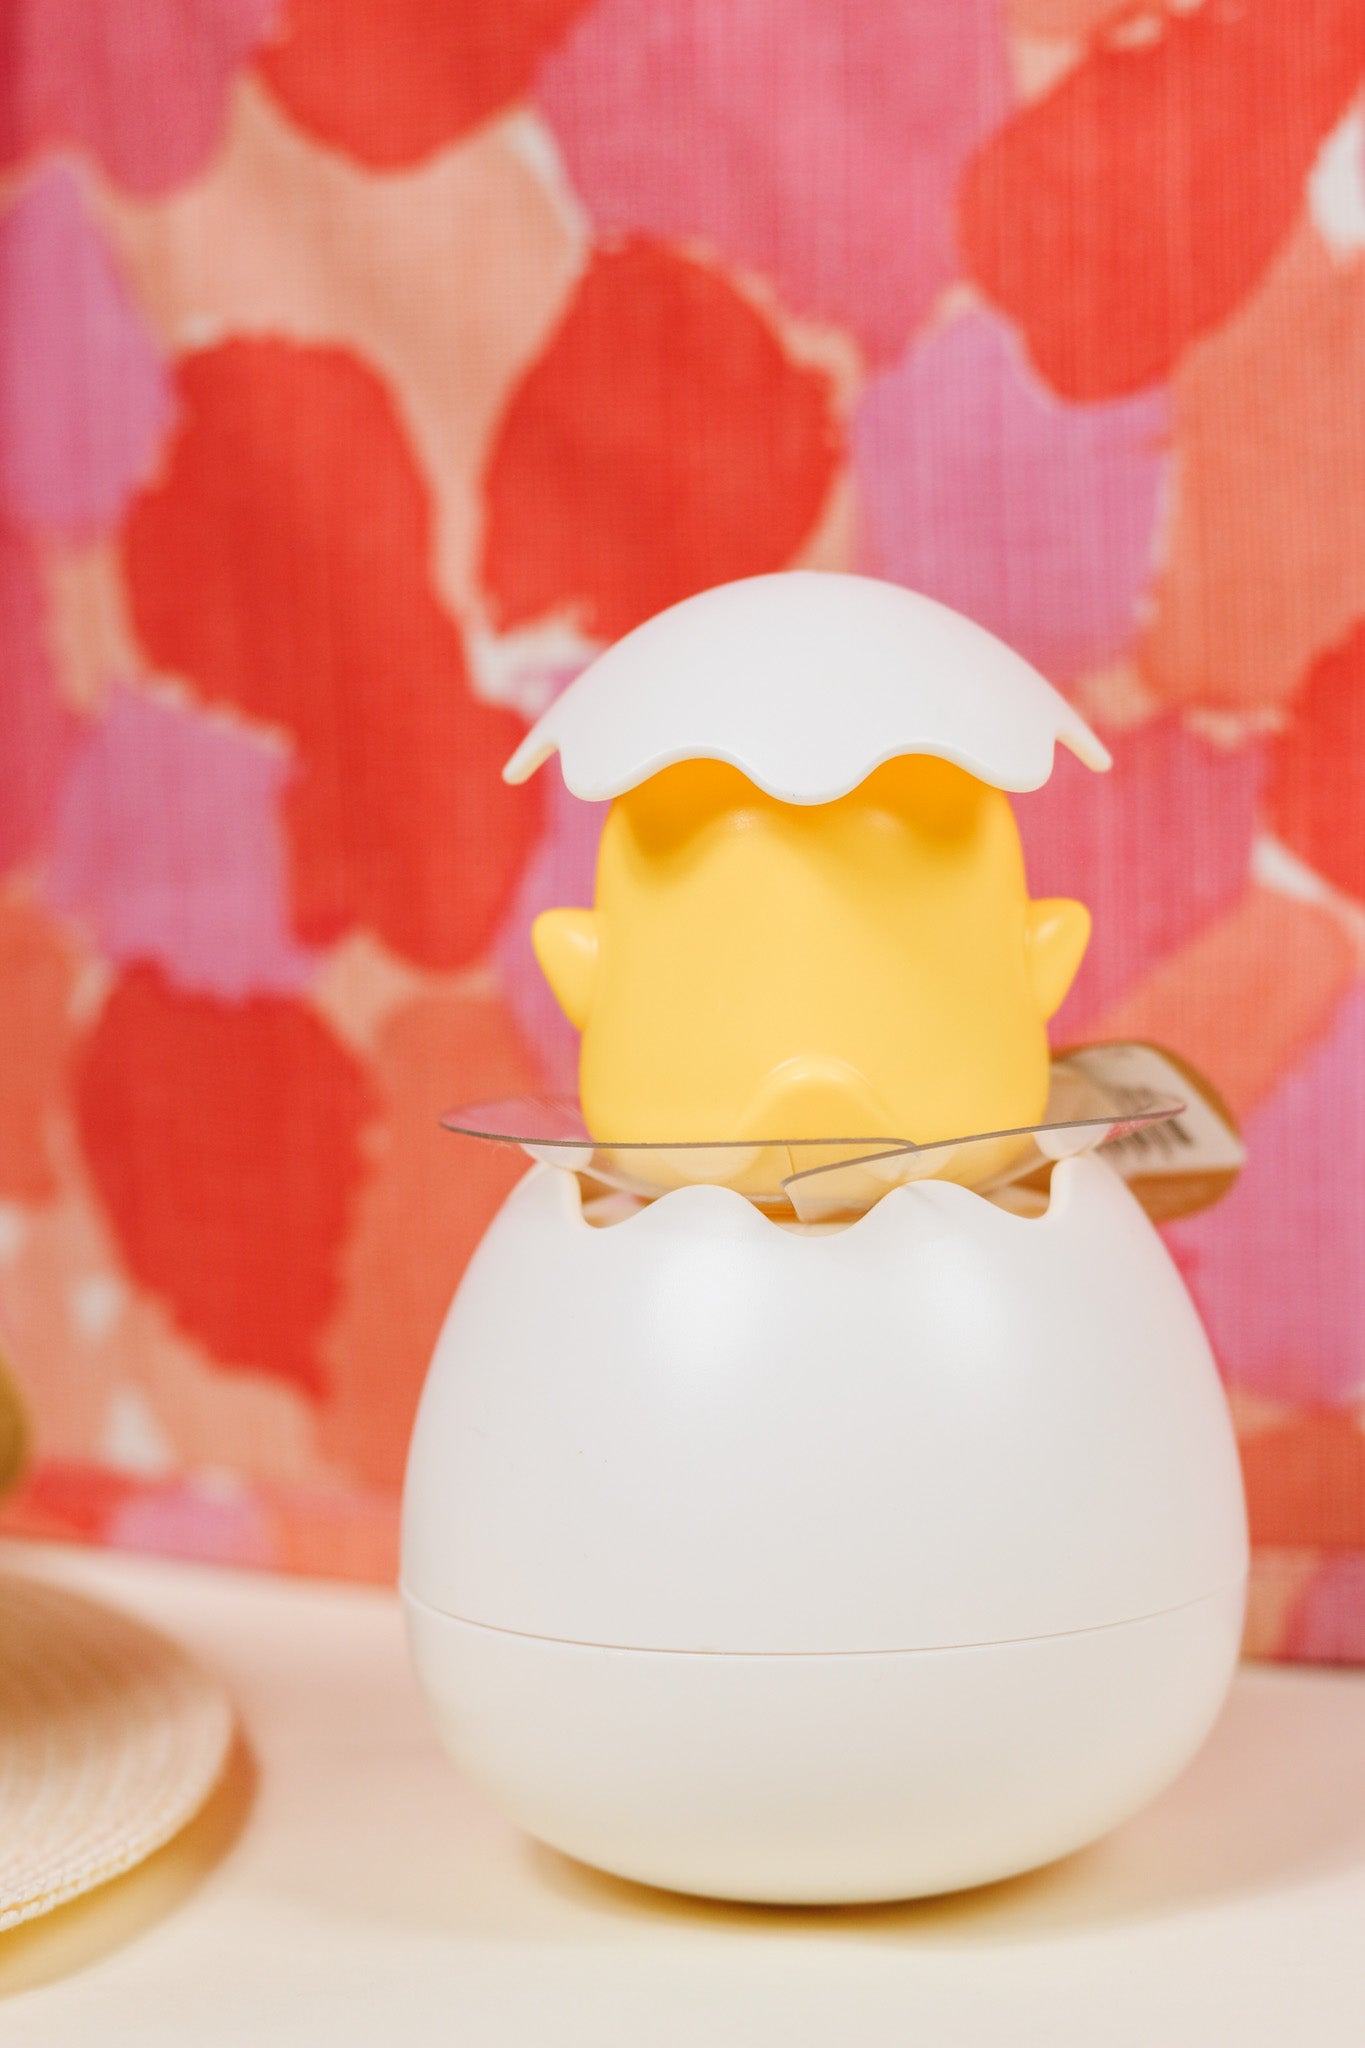 Yellow Pop Up Chick Bath Toy